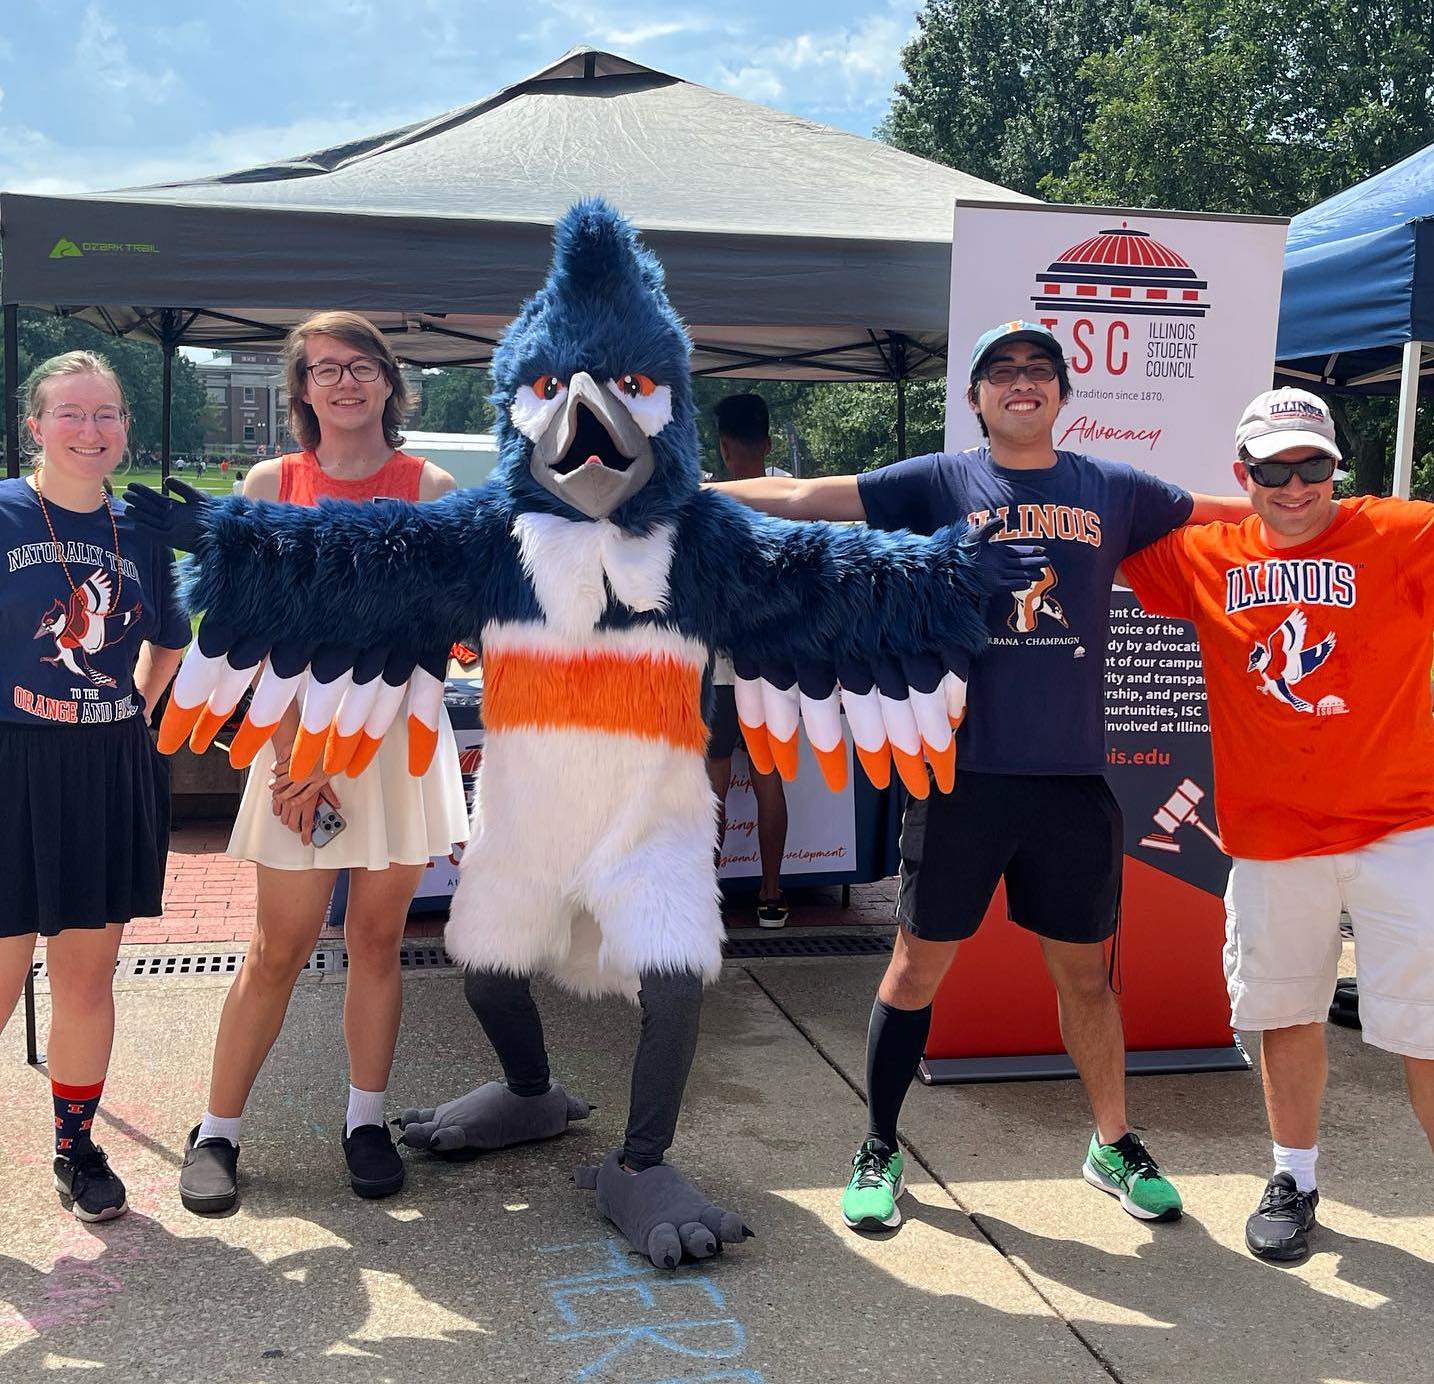 A kingfisher mascot stands with arms spread open. On each side are two people, wearing blue and orange t-shirts. The kingfisher costume is a blue, white, and orange bird. They are standing outside in front of a tent.